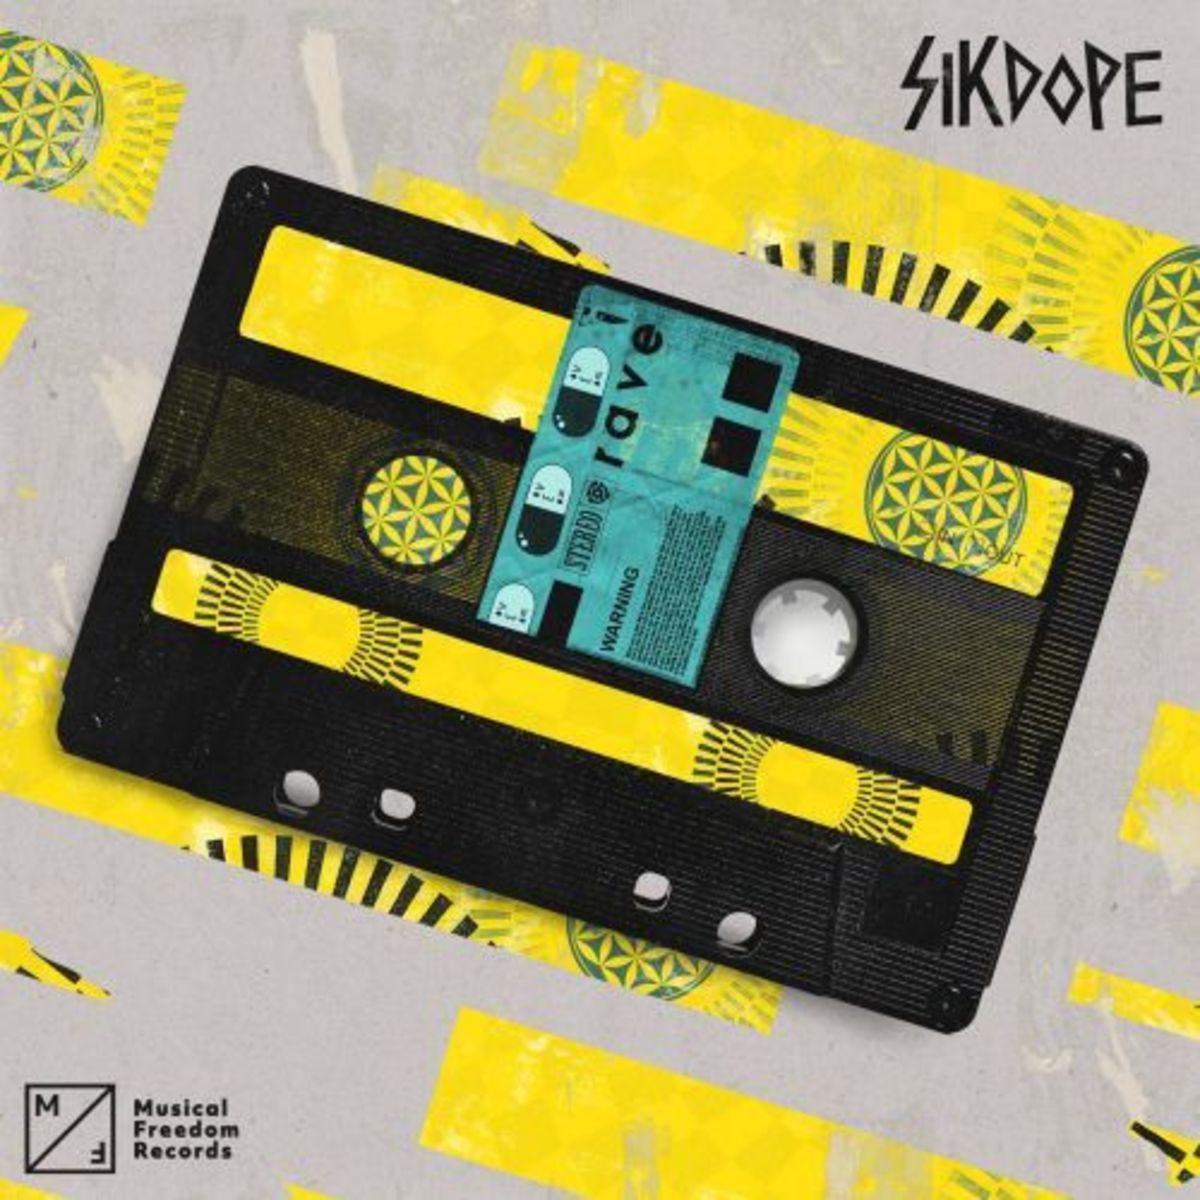 Sikdope Releases New Single "Rave" on Tiesto's Musical Freedom Records / Spinnin' Records (EDM.com Feature)